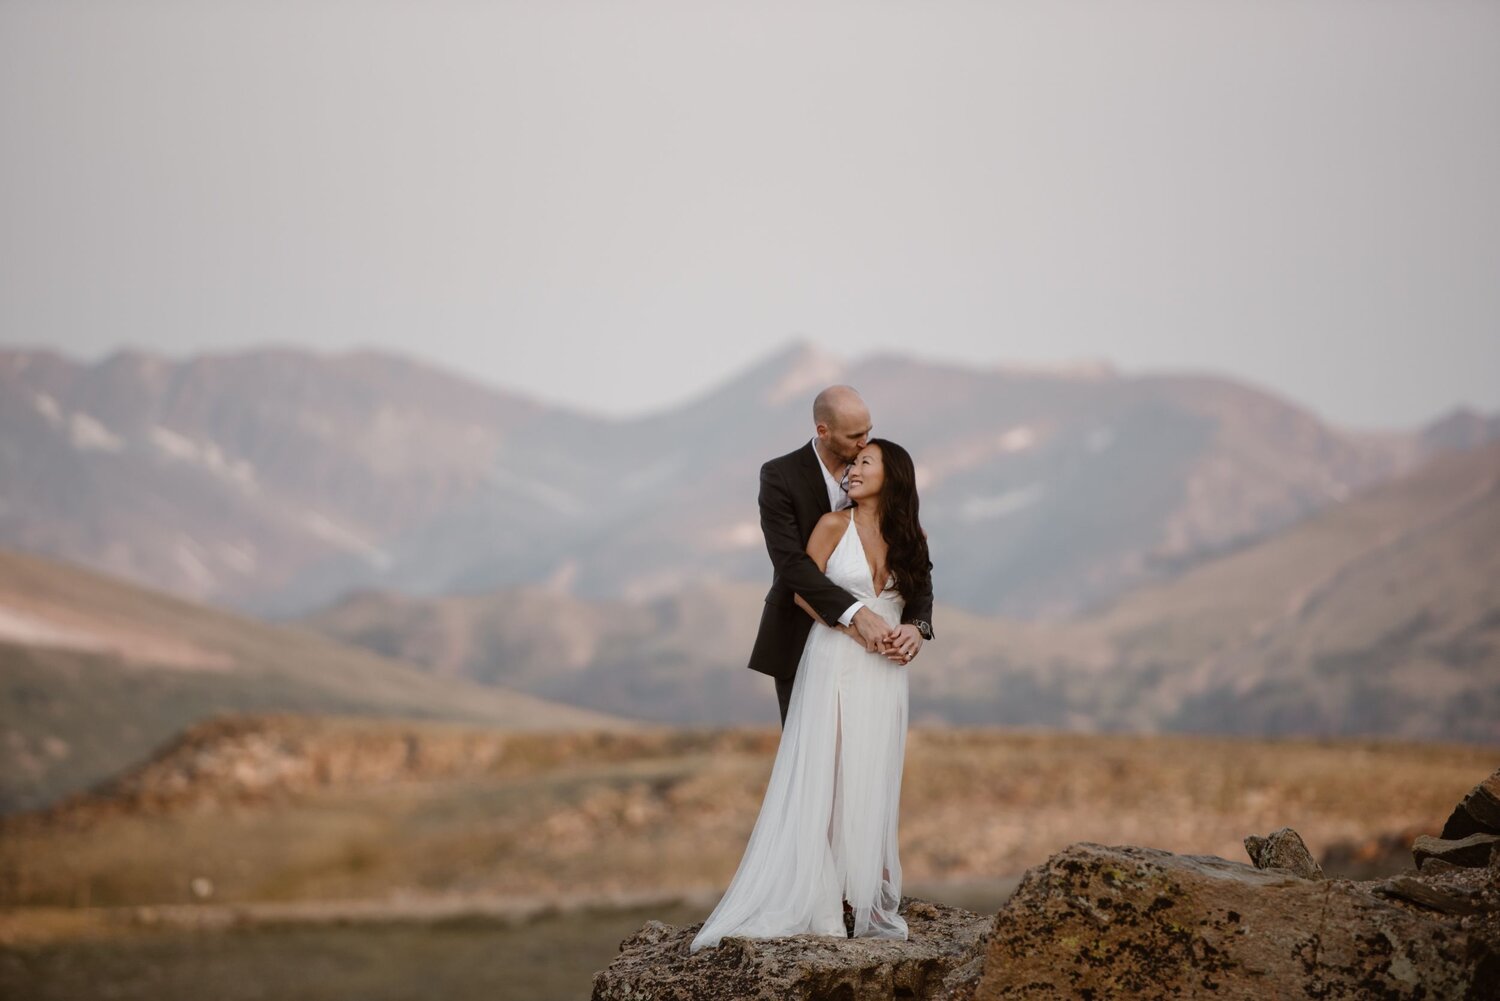 Bride and groom embrace on a mountain top.